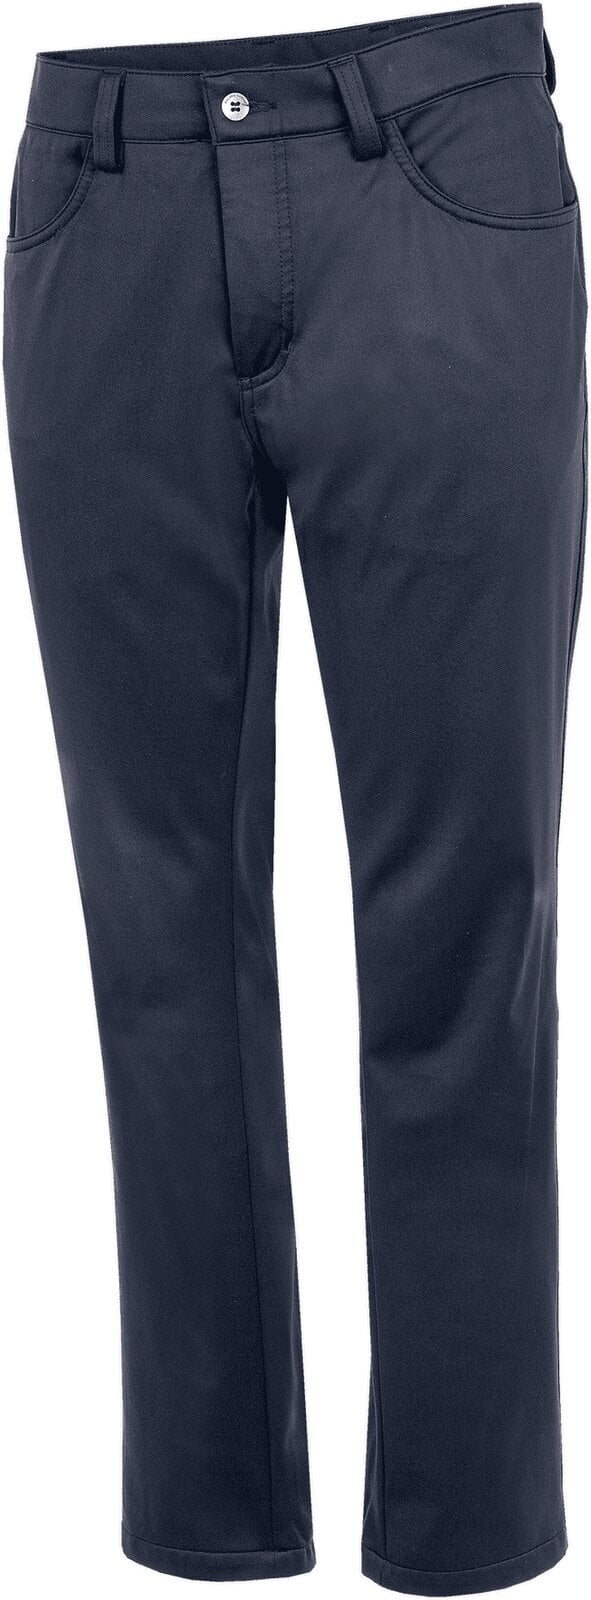 Trousers Galvin Green Lane MensWindproof And Water Repellent Pants Navy 32/32